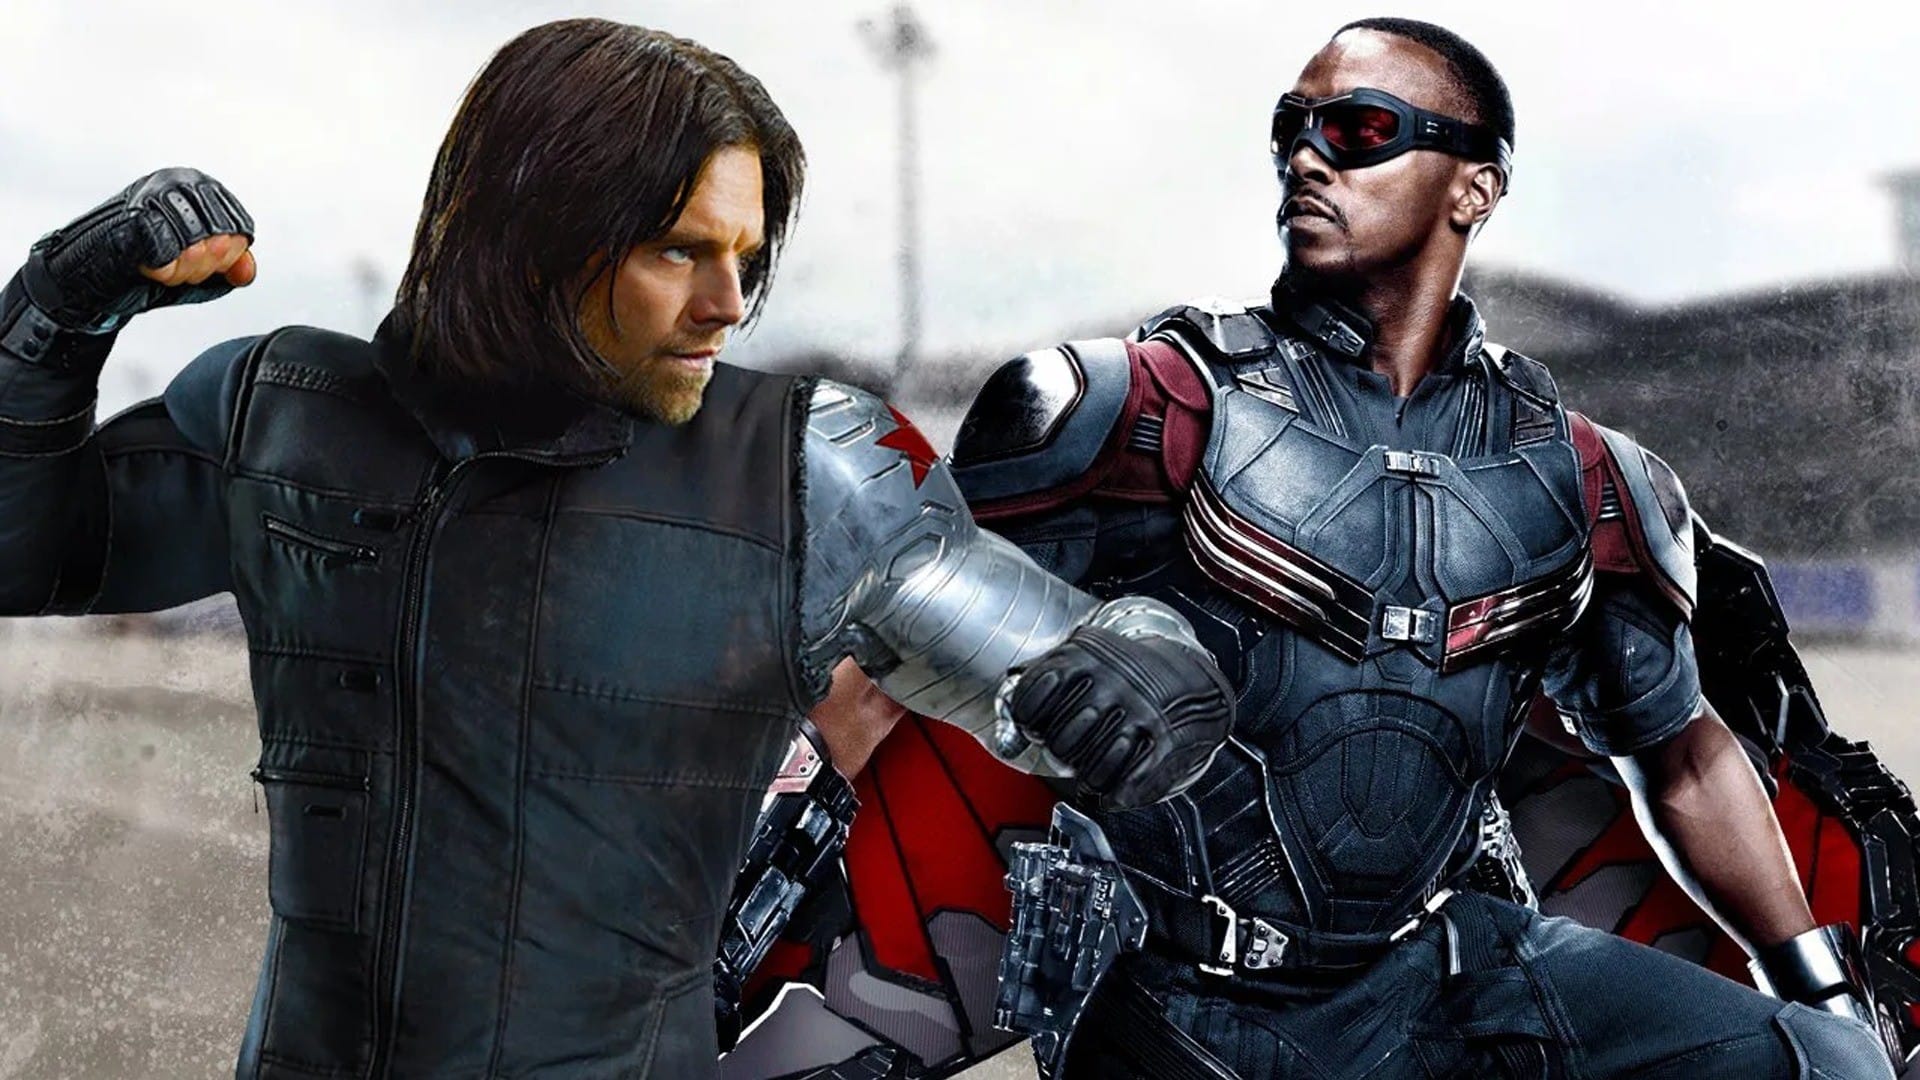 mcu seriál The Falcon and the Winter Soldier